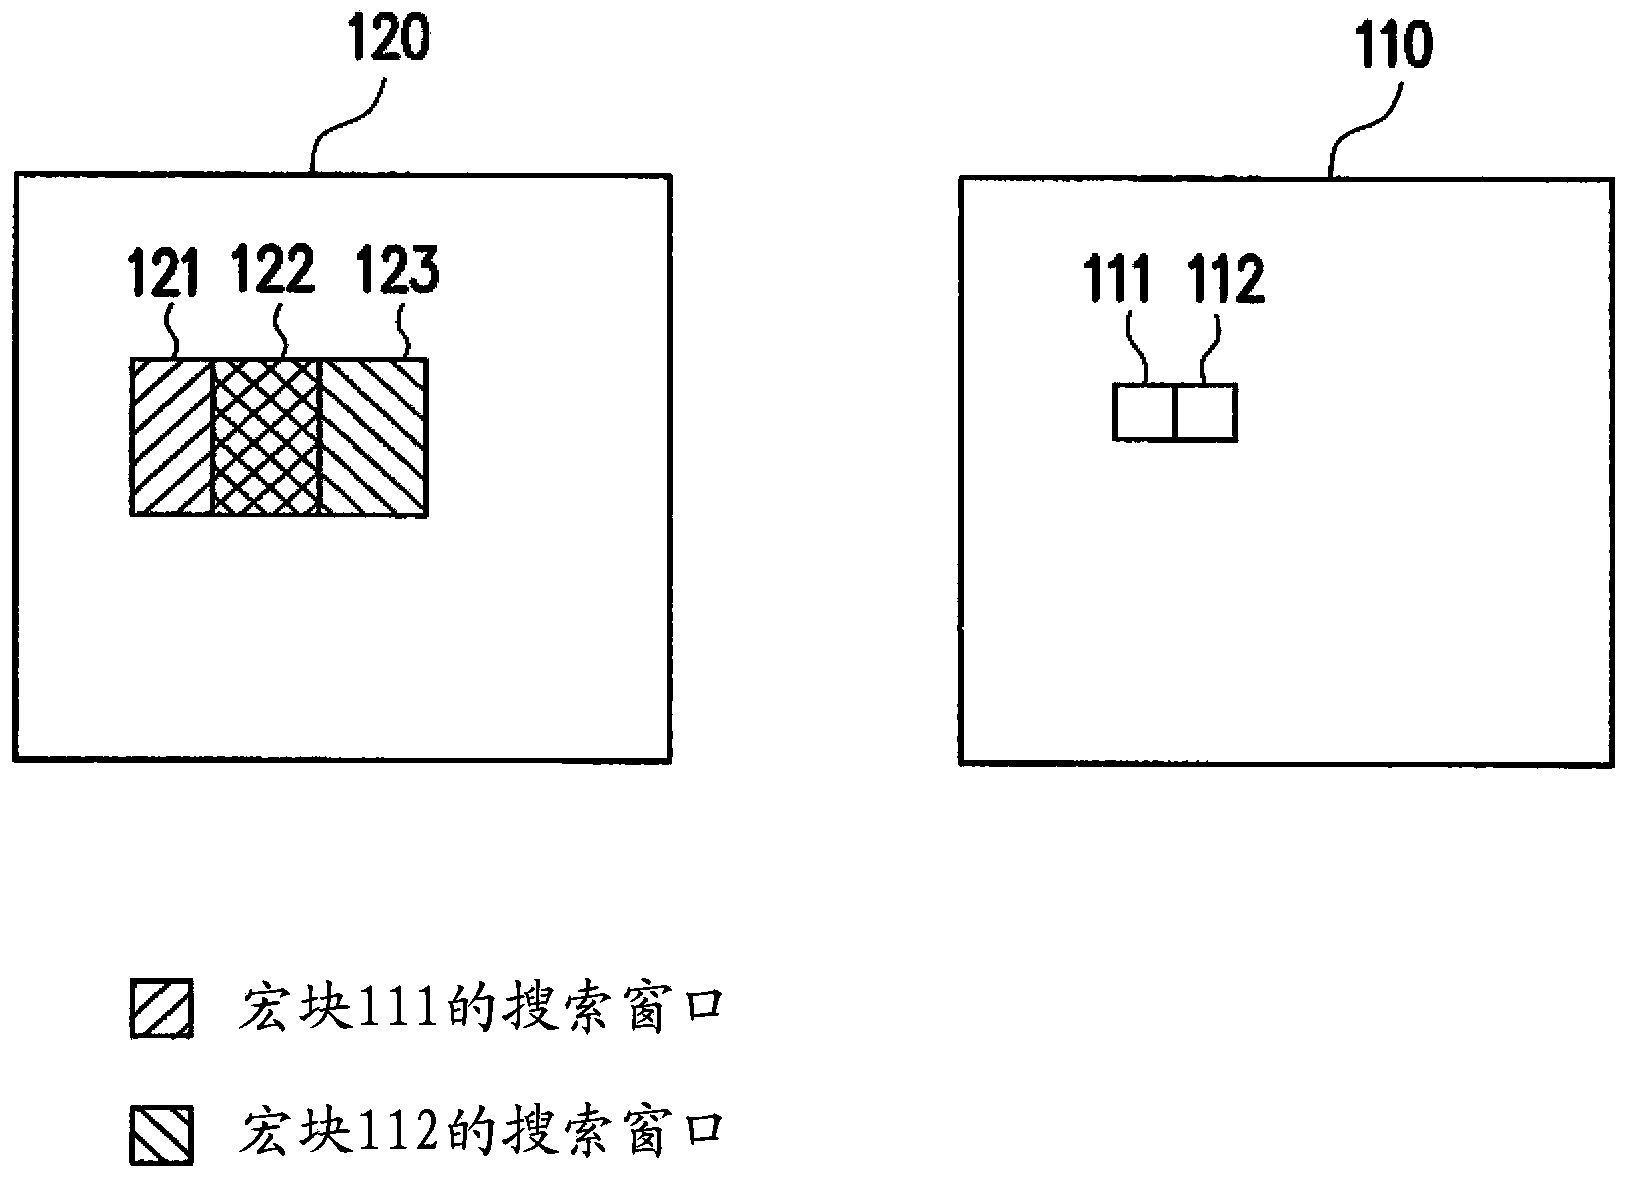 Video coding method and video coding device